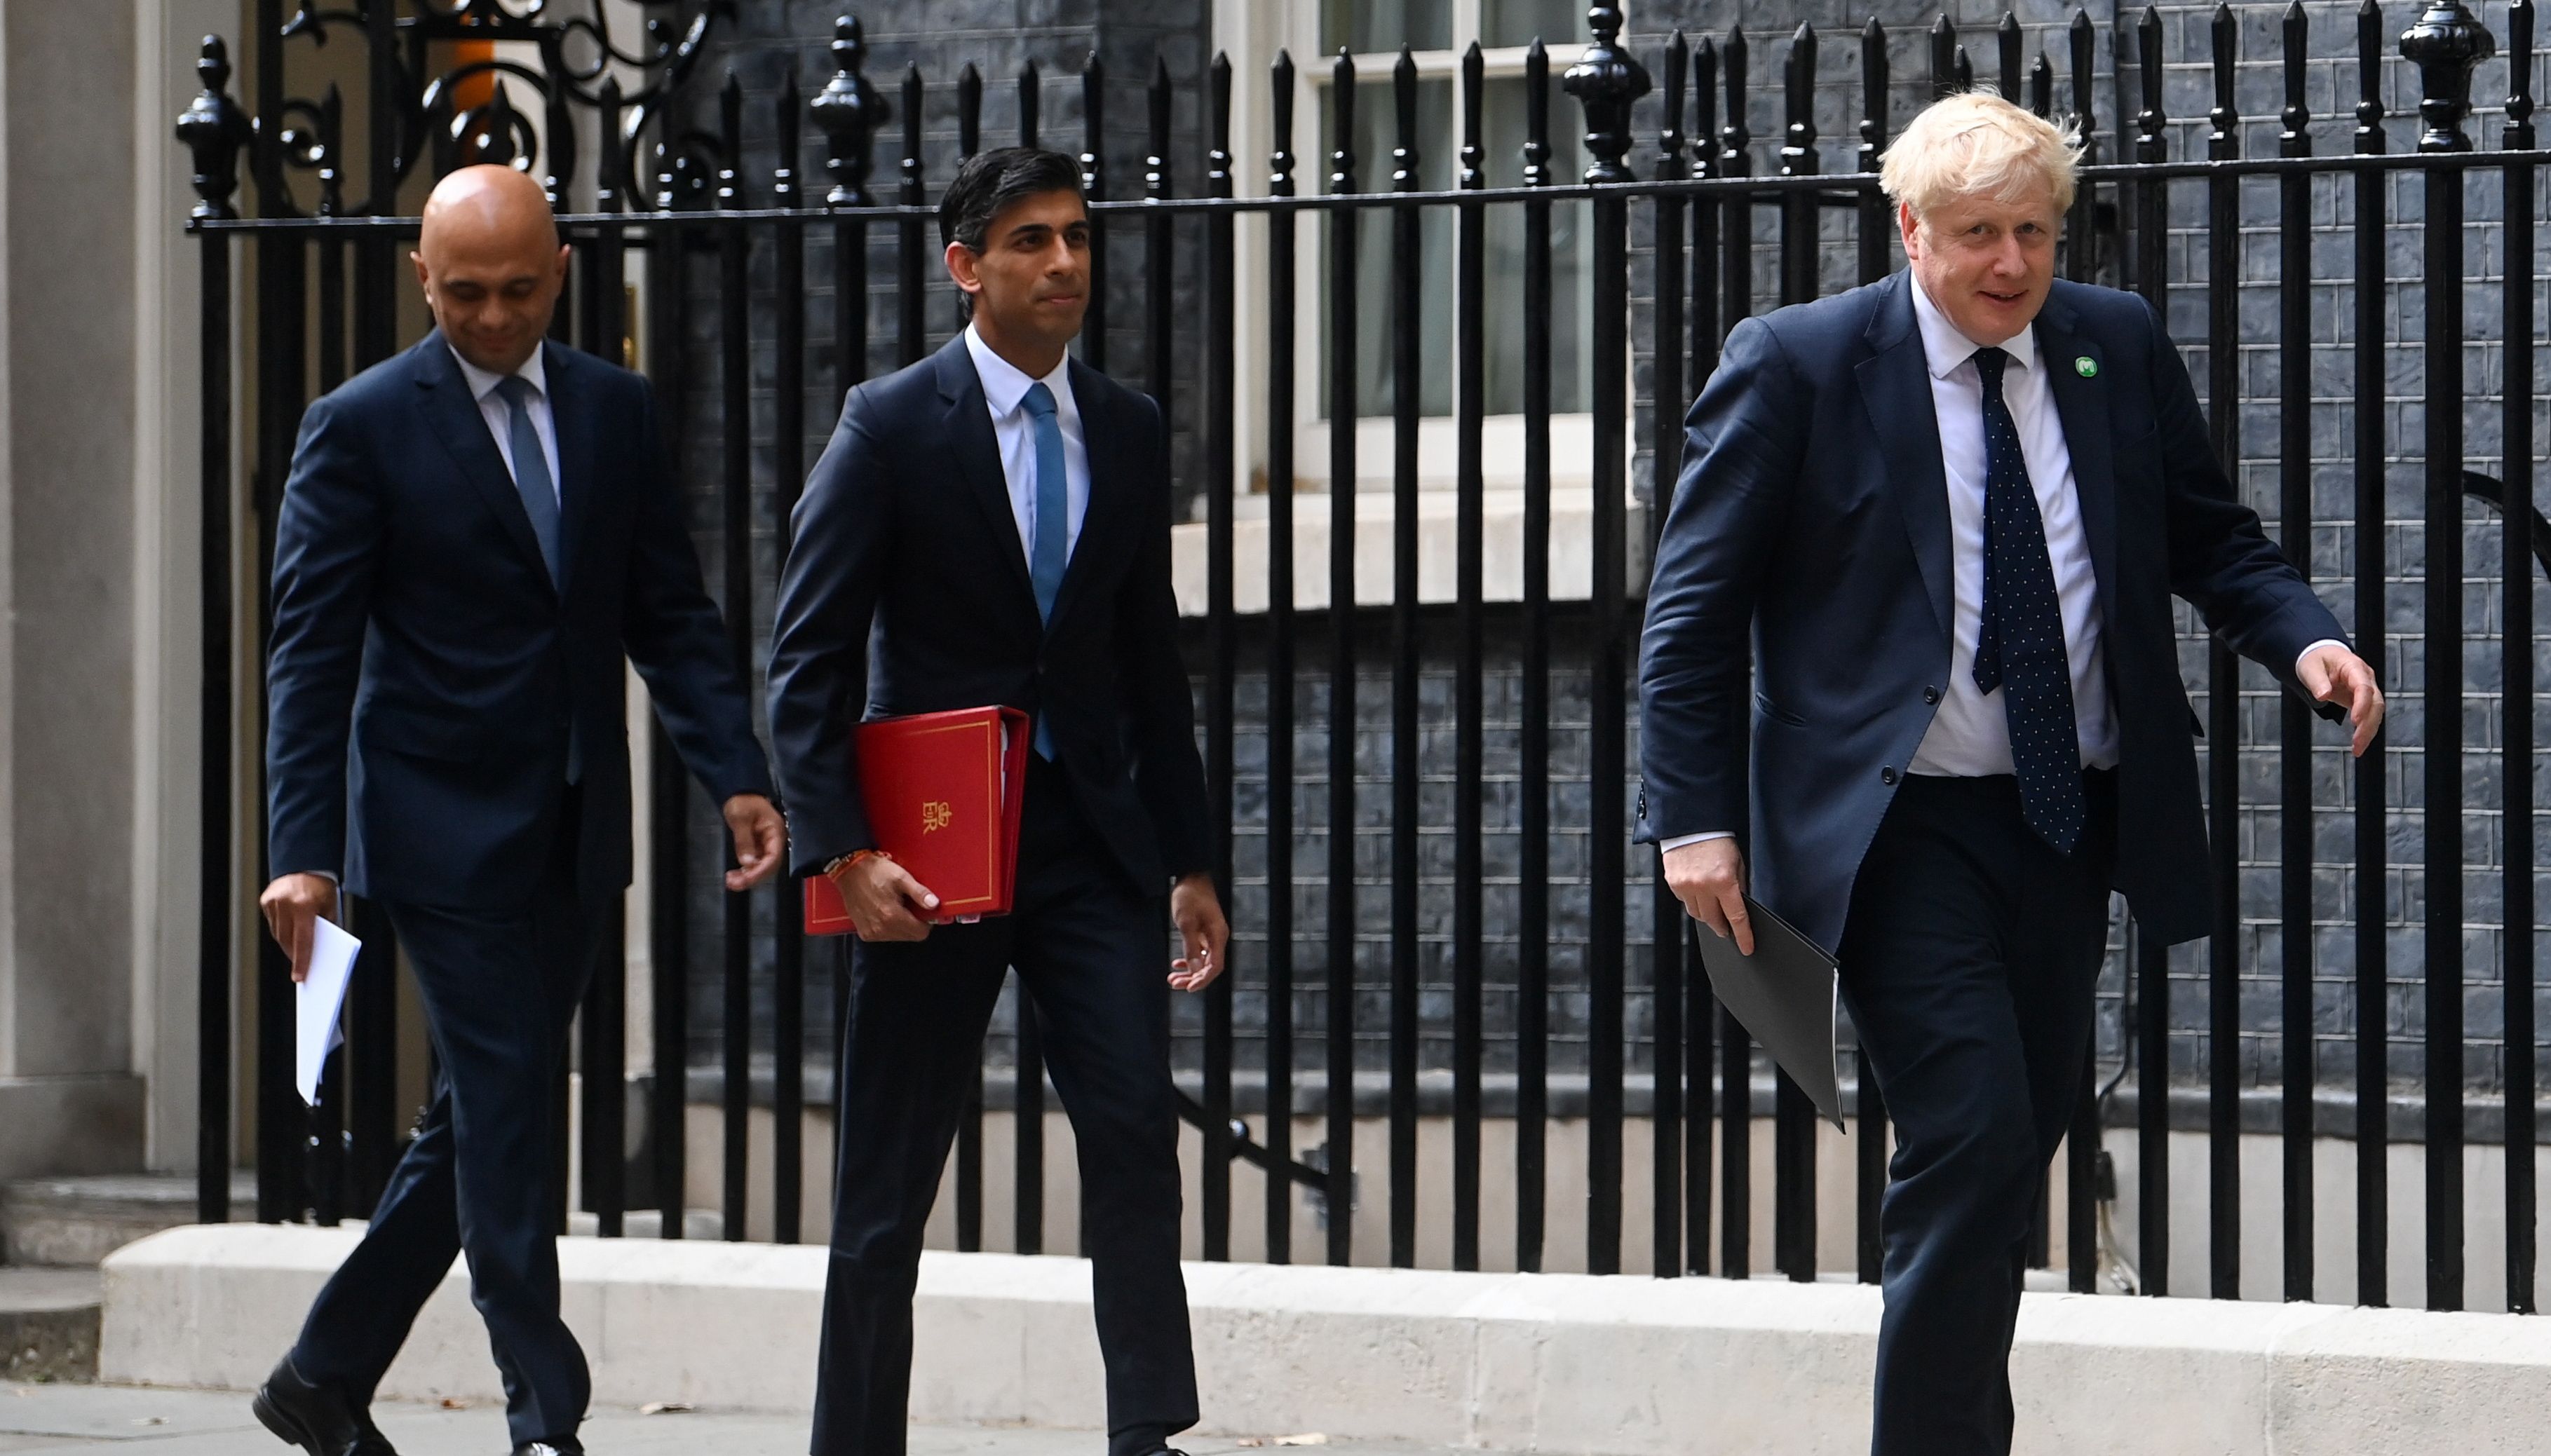 Chancellor of the Exchequer Rishi Sunak and Health Secretary Sajid Javid, have resigned after the Prime Minister was forced into a humiliating apology over his handling of the Chris Pincher row after it emerged he had forgotten about being told of previous allegations of %22inappropriate%22 conduct.